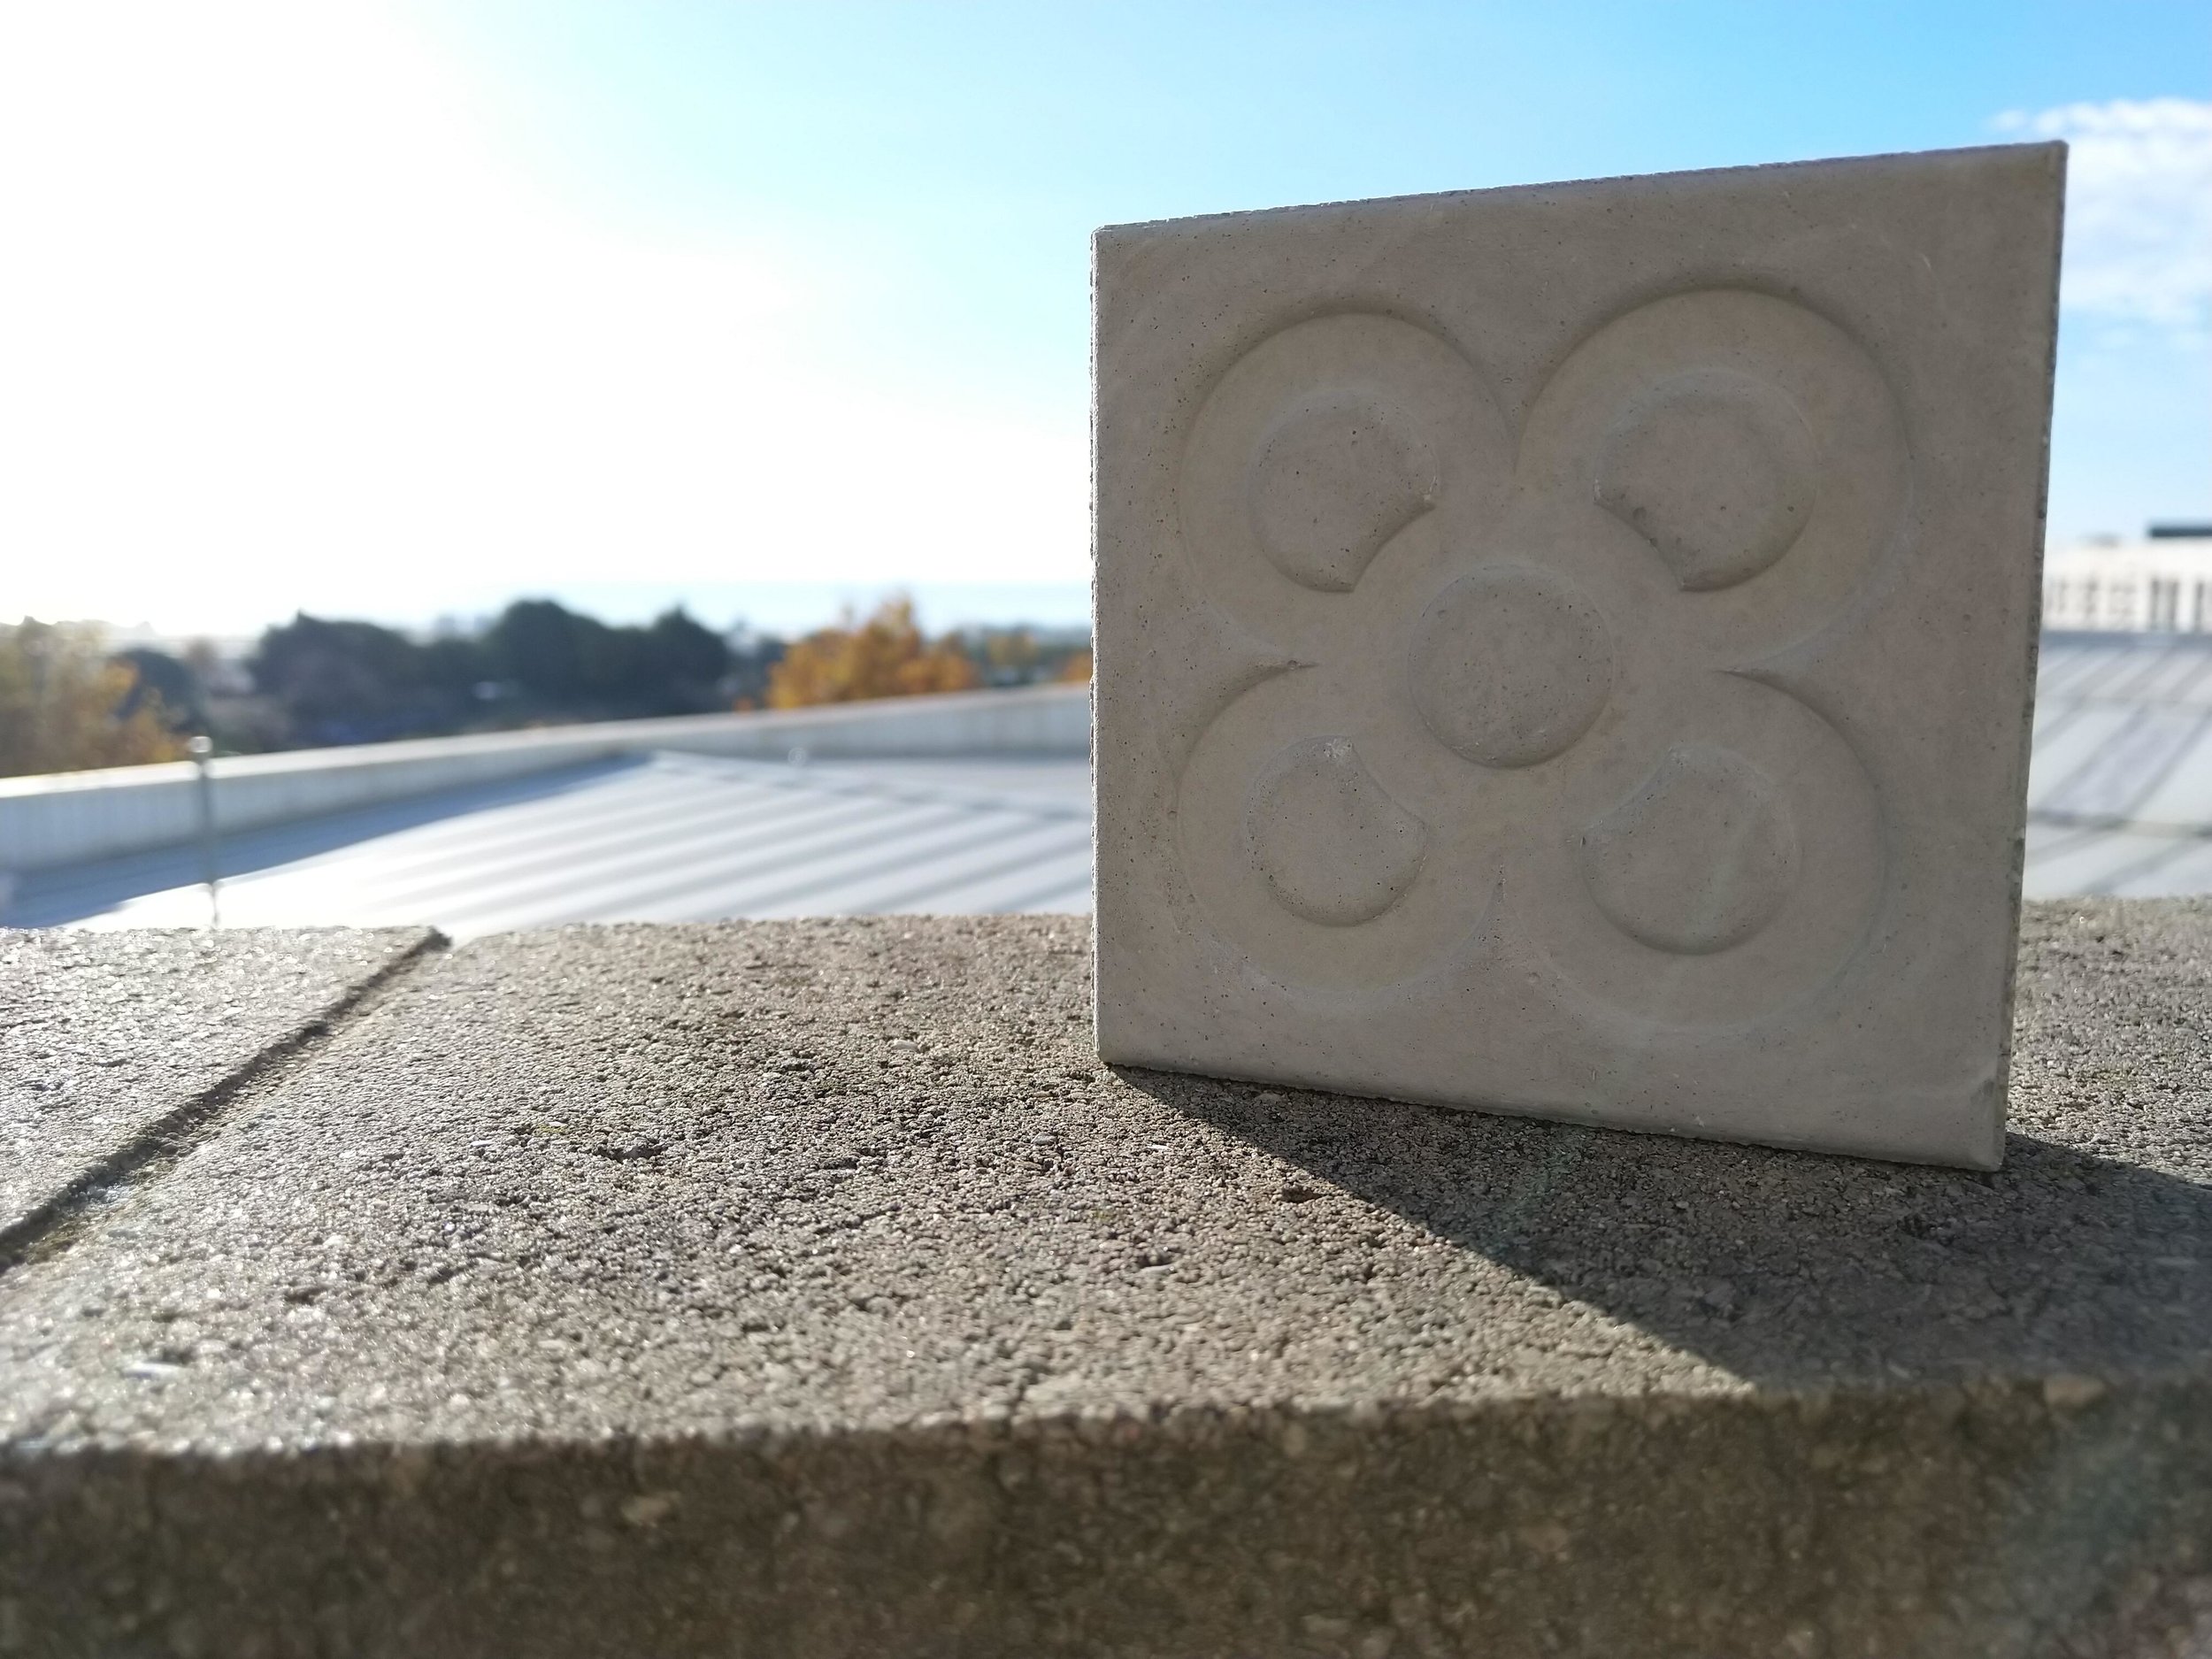 3D Printing Waste Becomes Sustainable Concrete